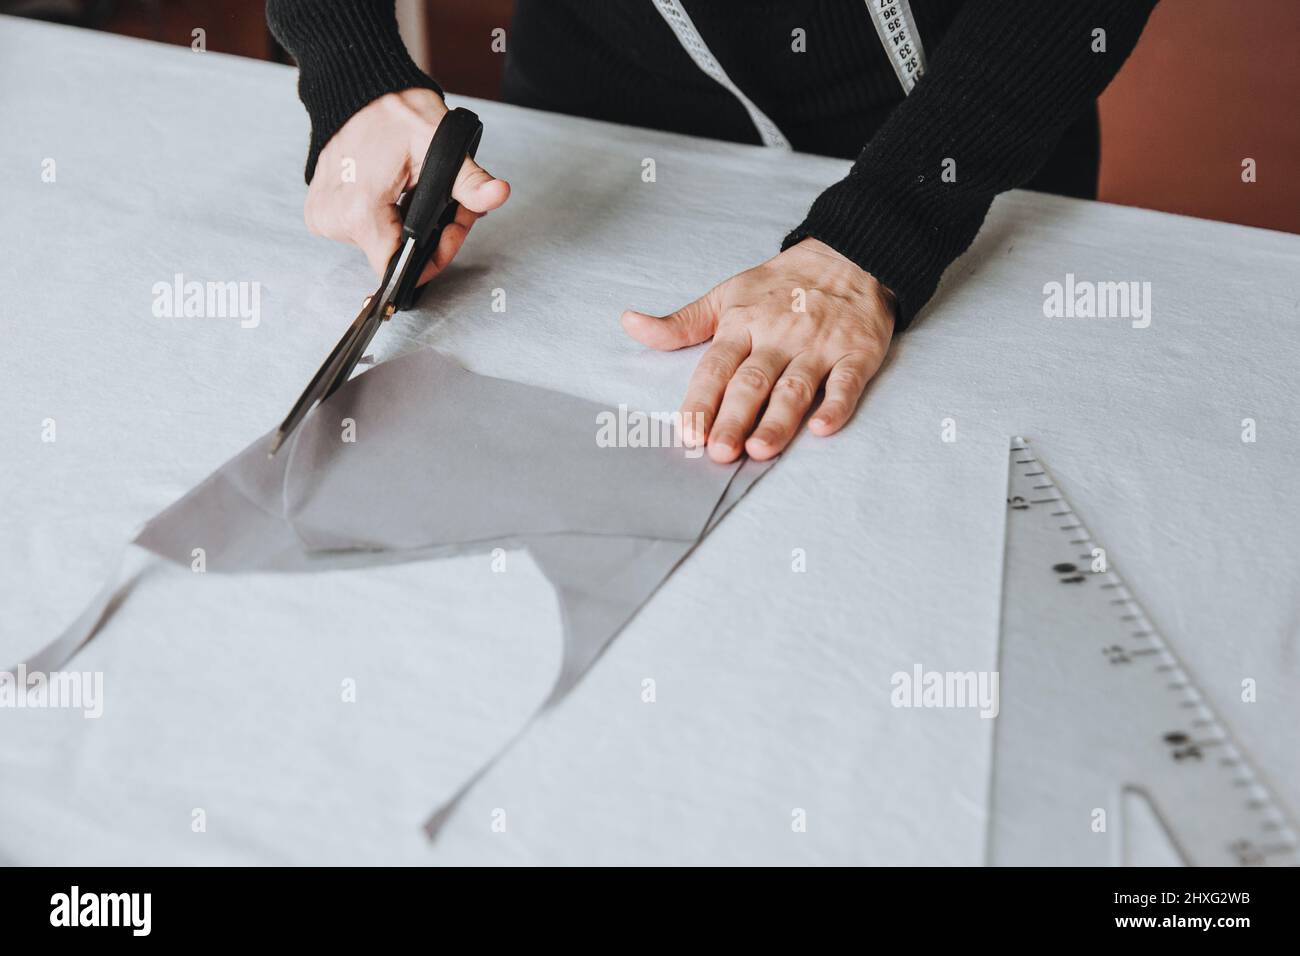 Tailor designer working of cutting piece of cloth with scissors, entrepreneur concept. Stock Photo